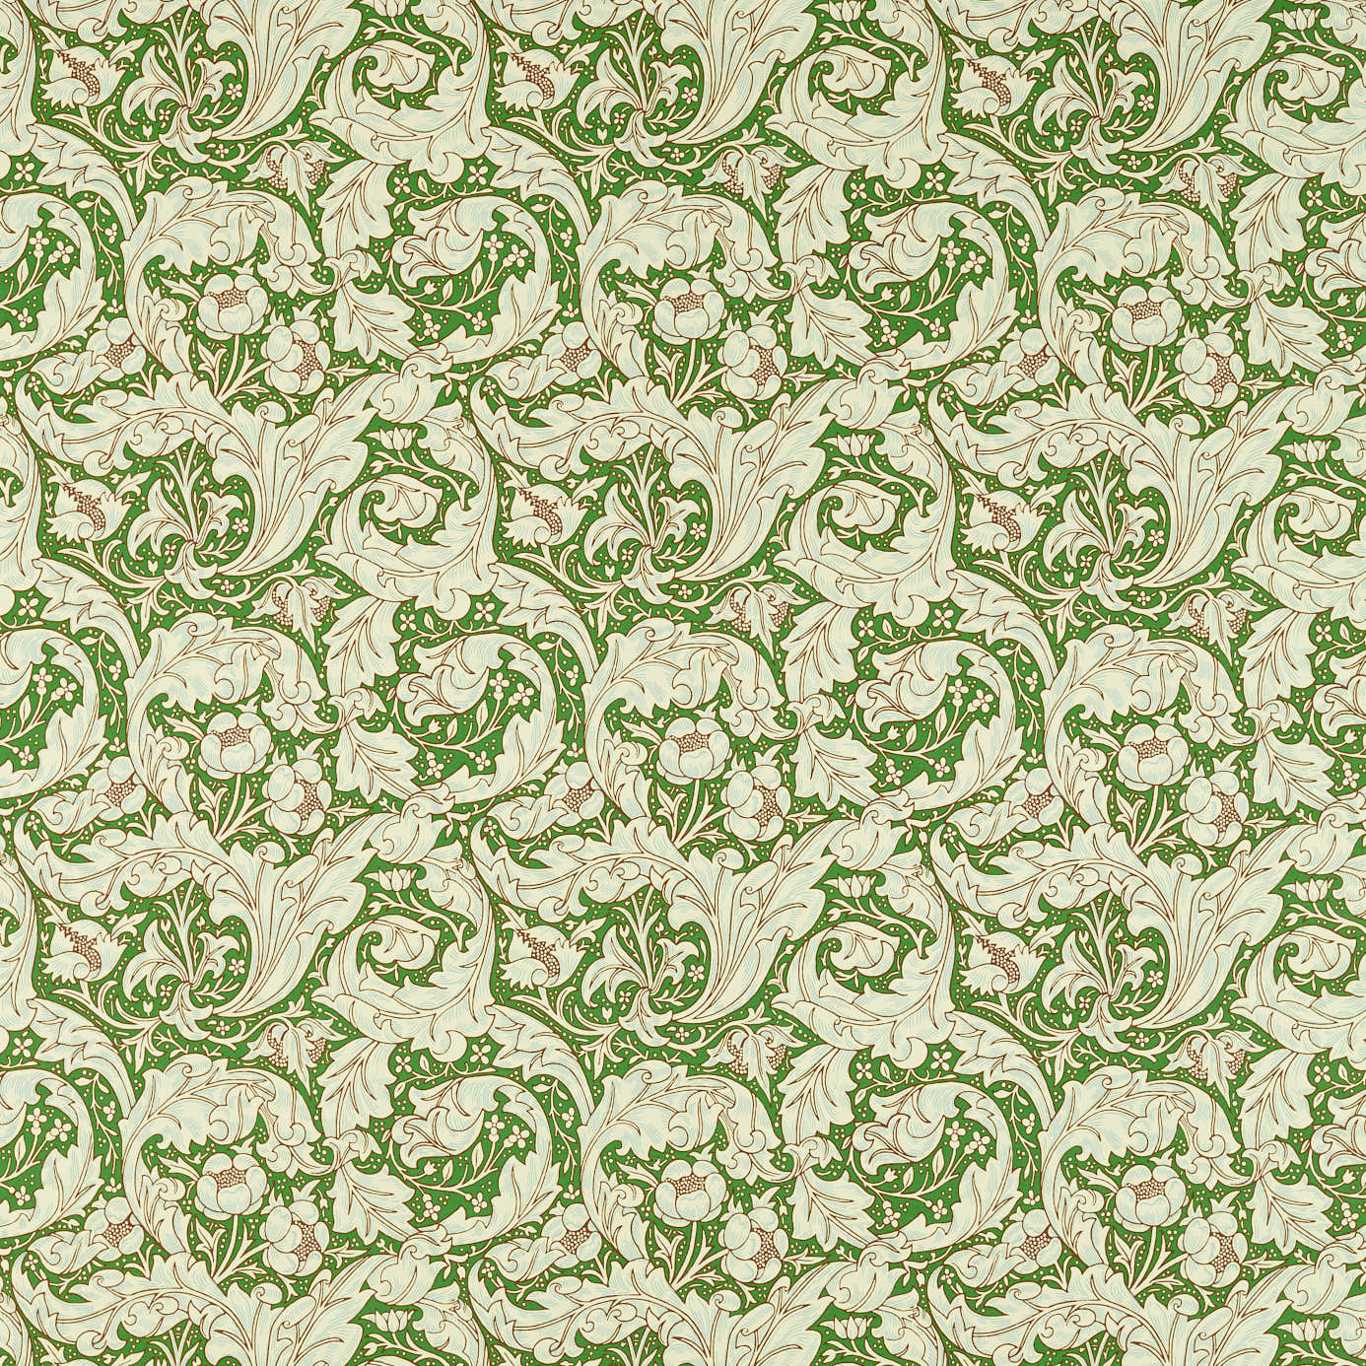 Bachelors Button Fabric by Morris & Co. - MCOP226986 - Leaf Green/Sky